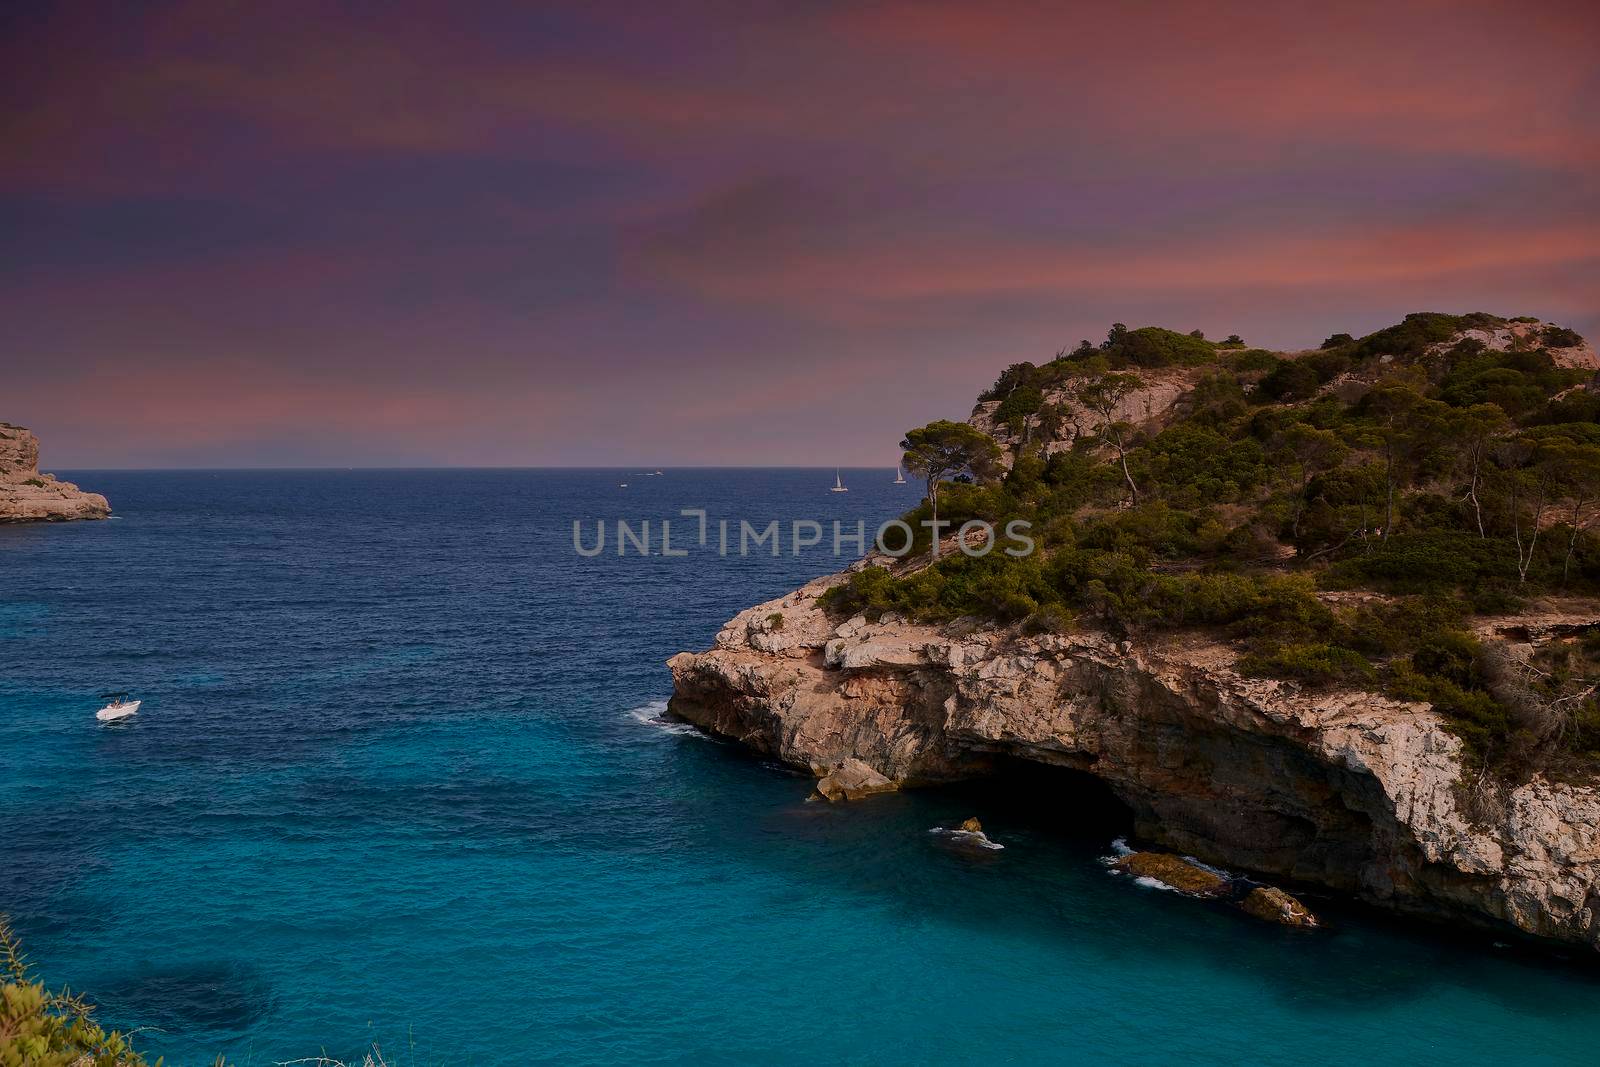 Cliff on turquoise beach with orange sunrise or sunset sky. Balearic Islands, Spain, Mediterranean Sea, unmanned, Sailboats